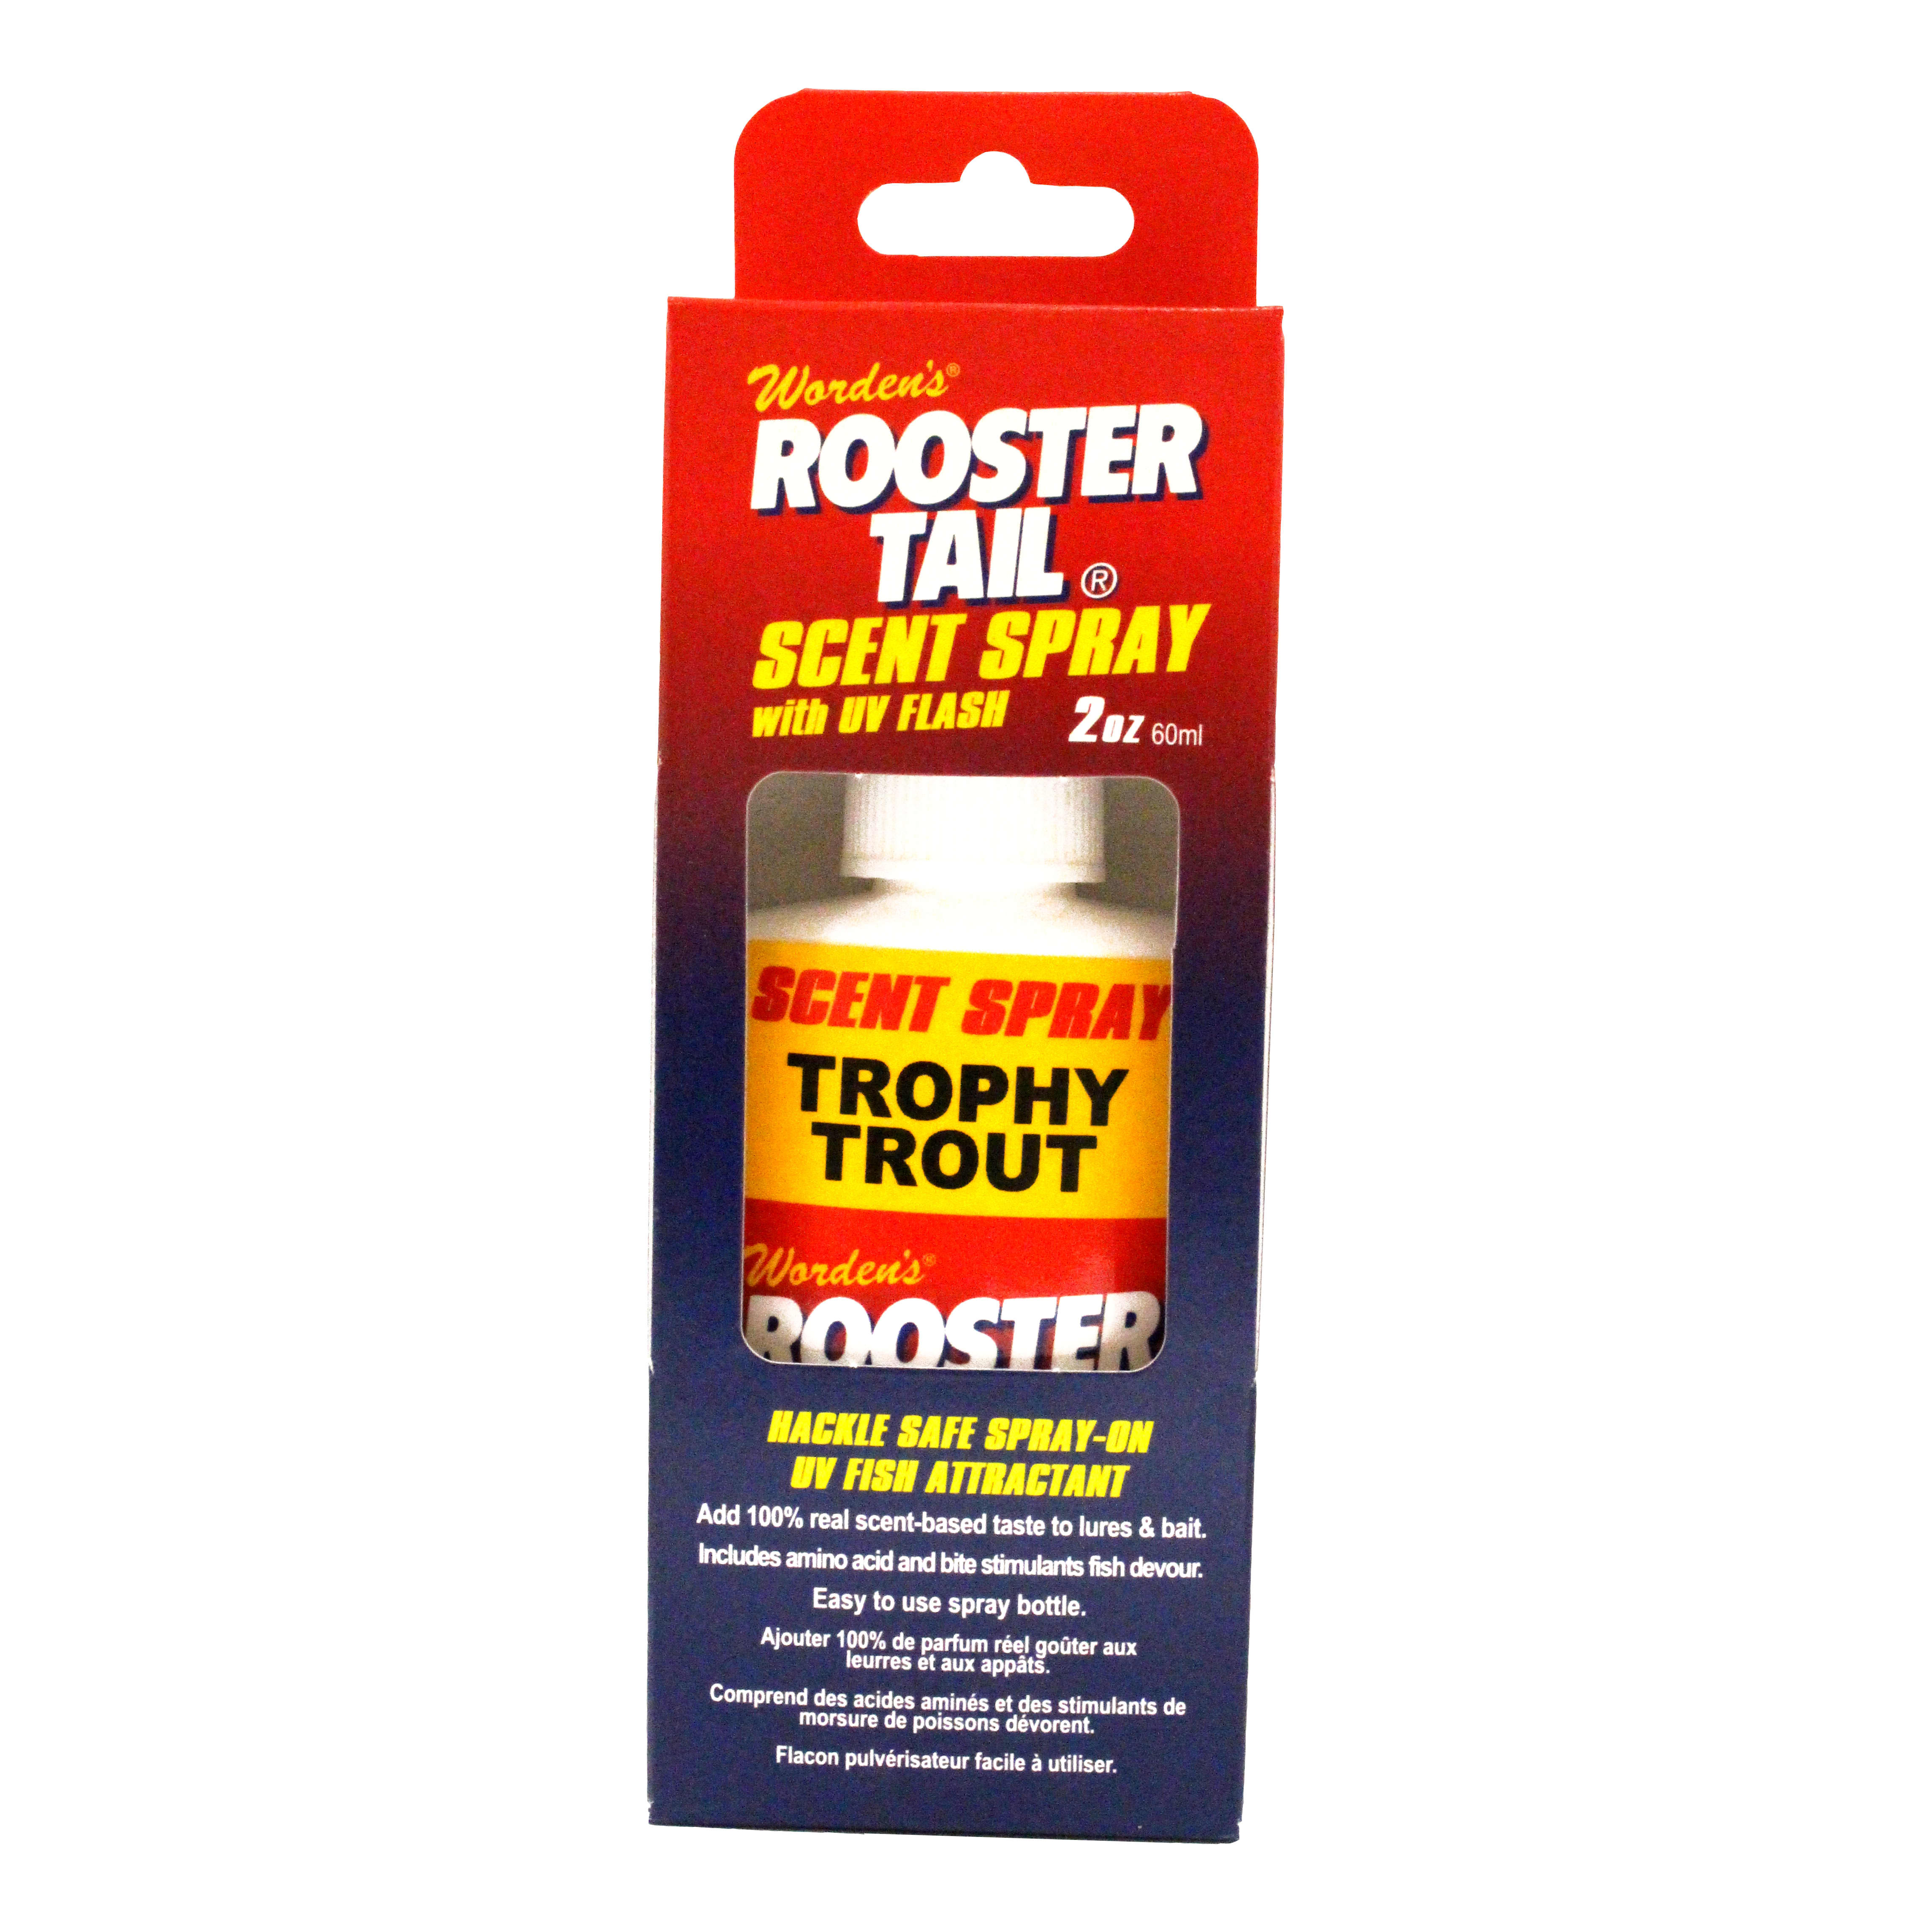 Worden’s Rooster Tail Scent Spray